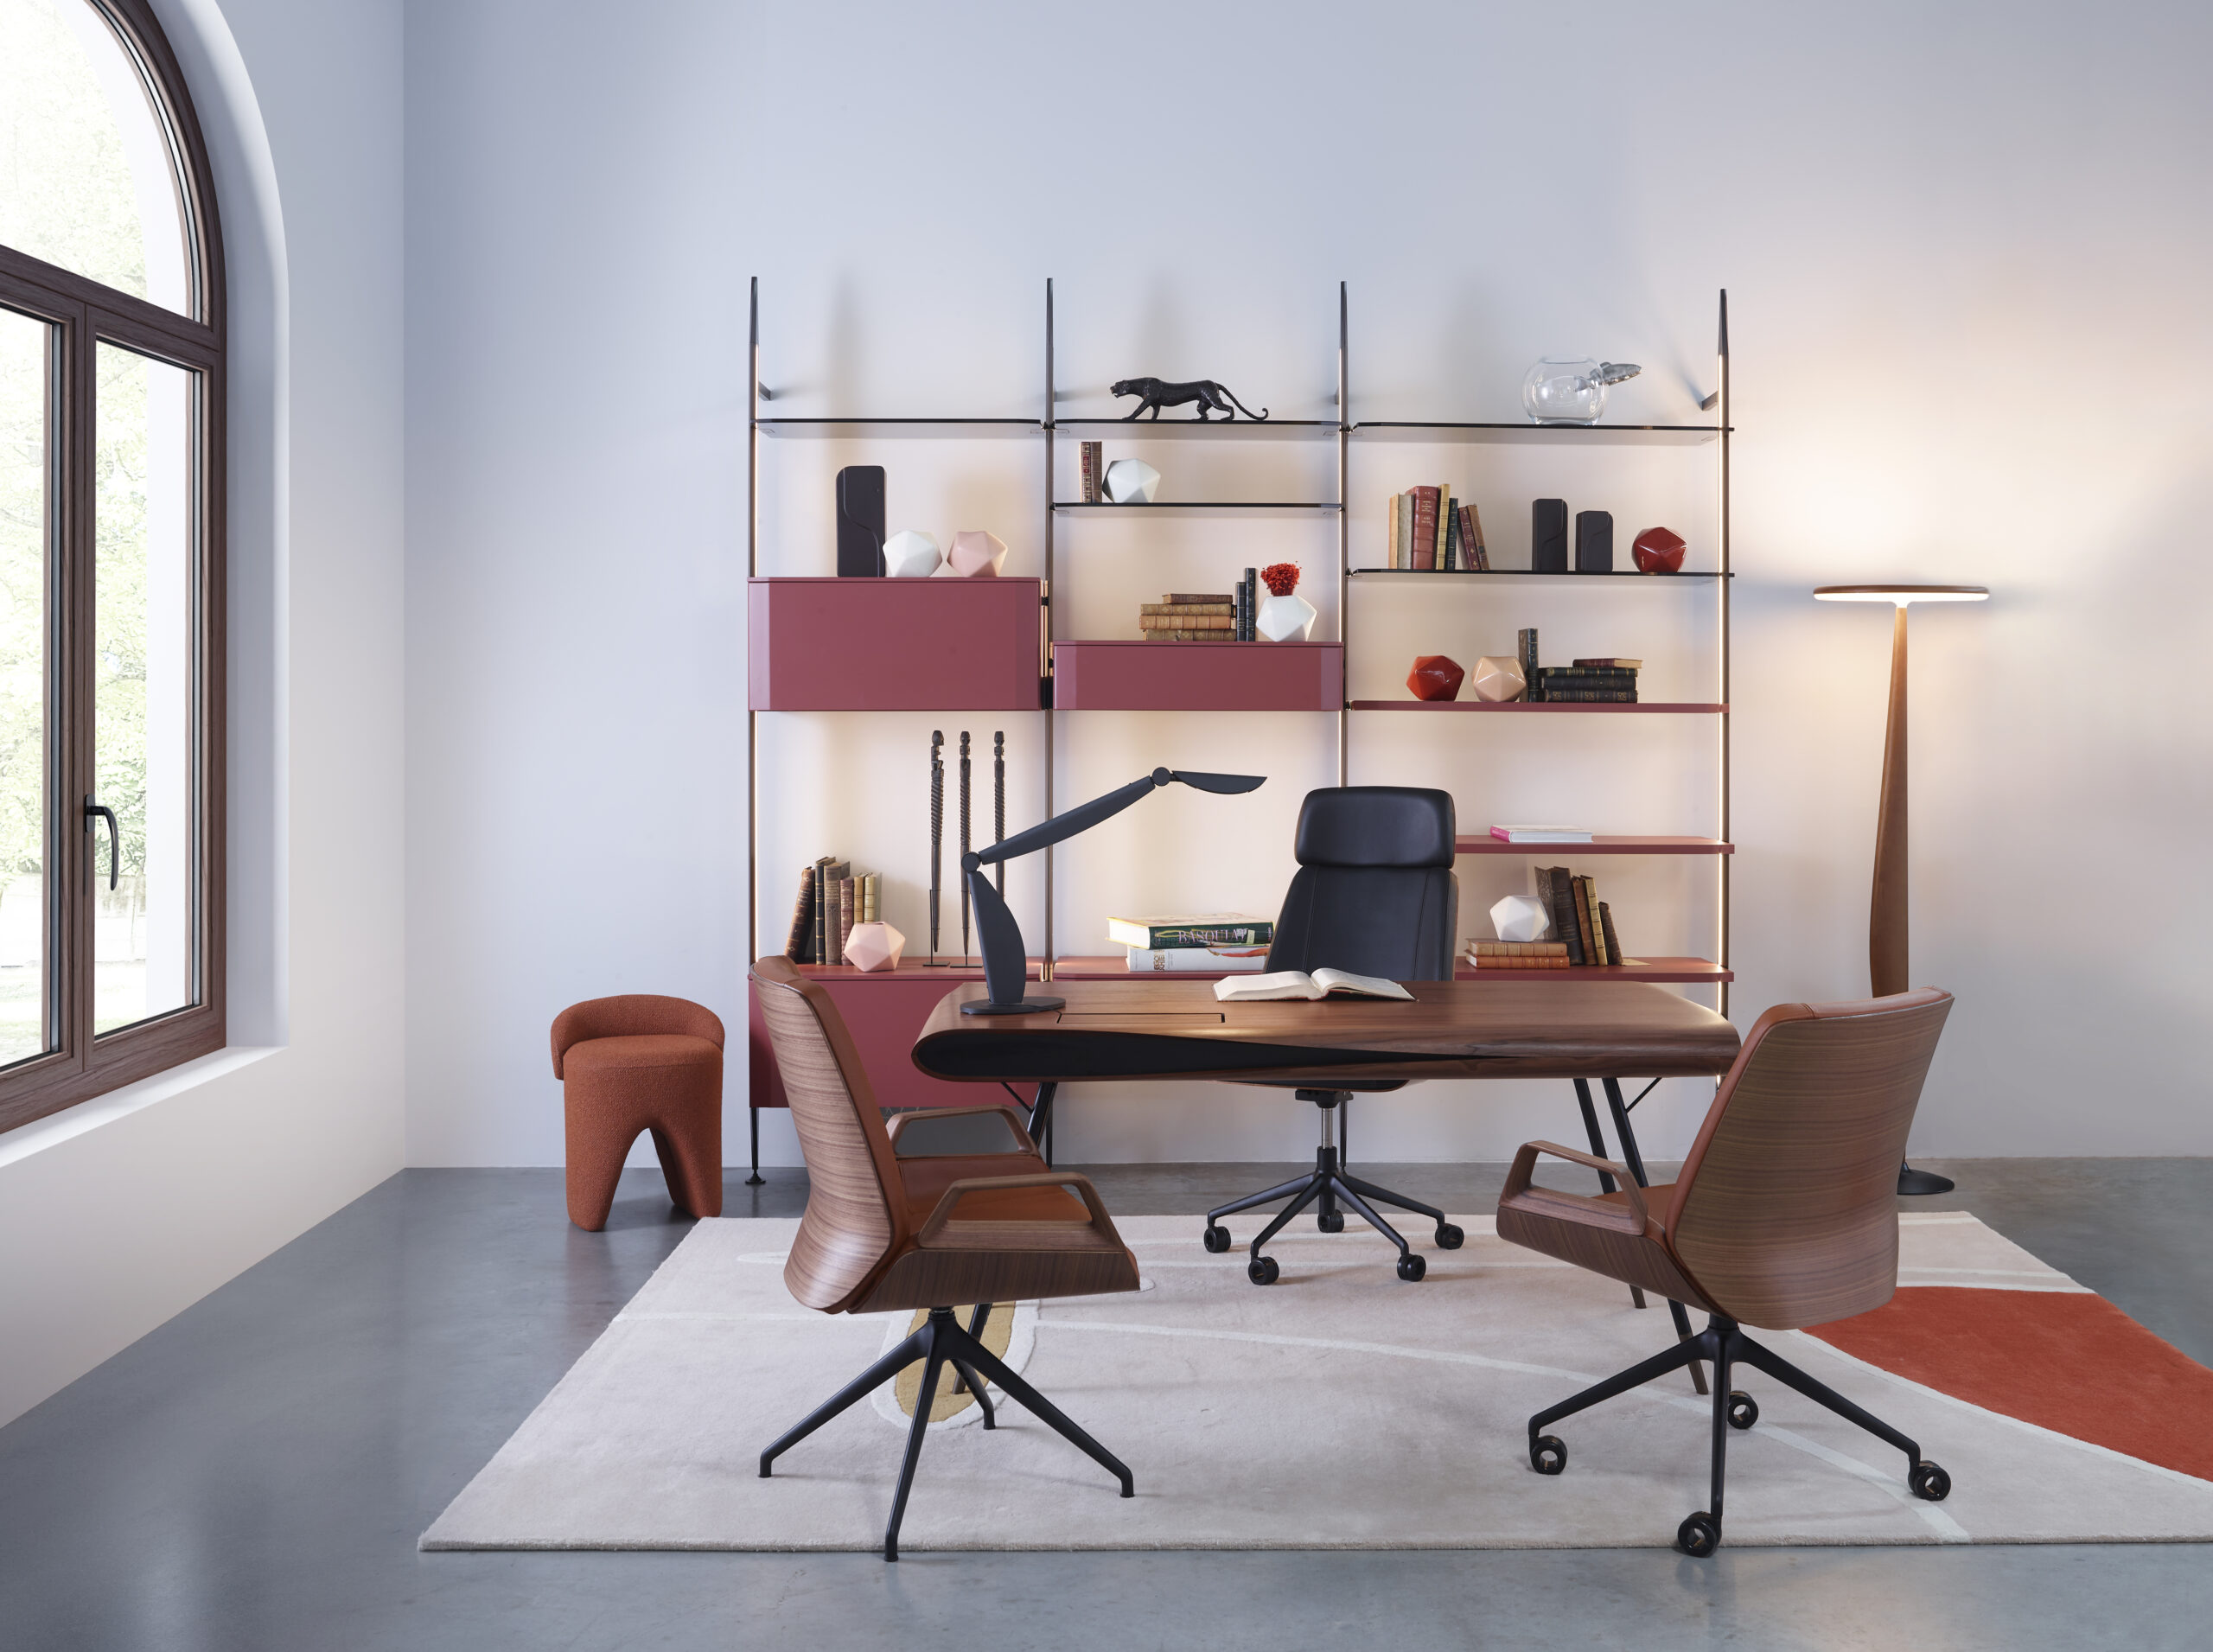 Roche Bobois launches new designs for the home workspace